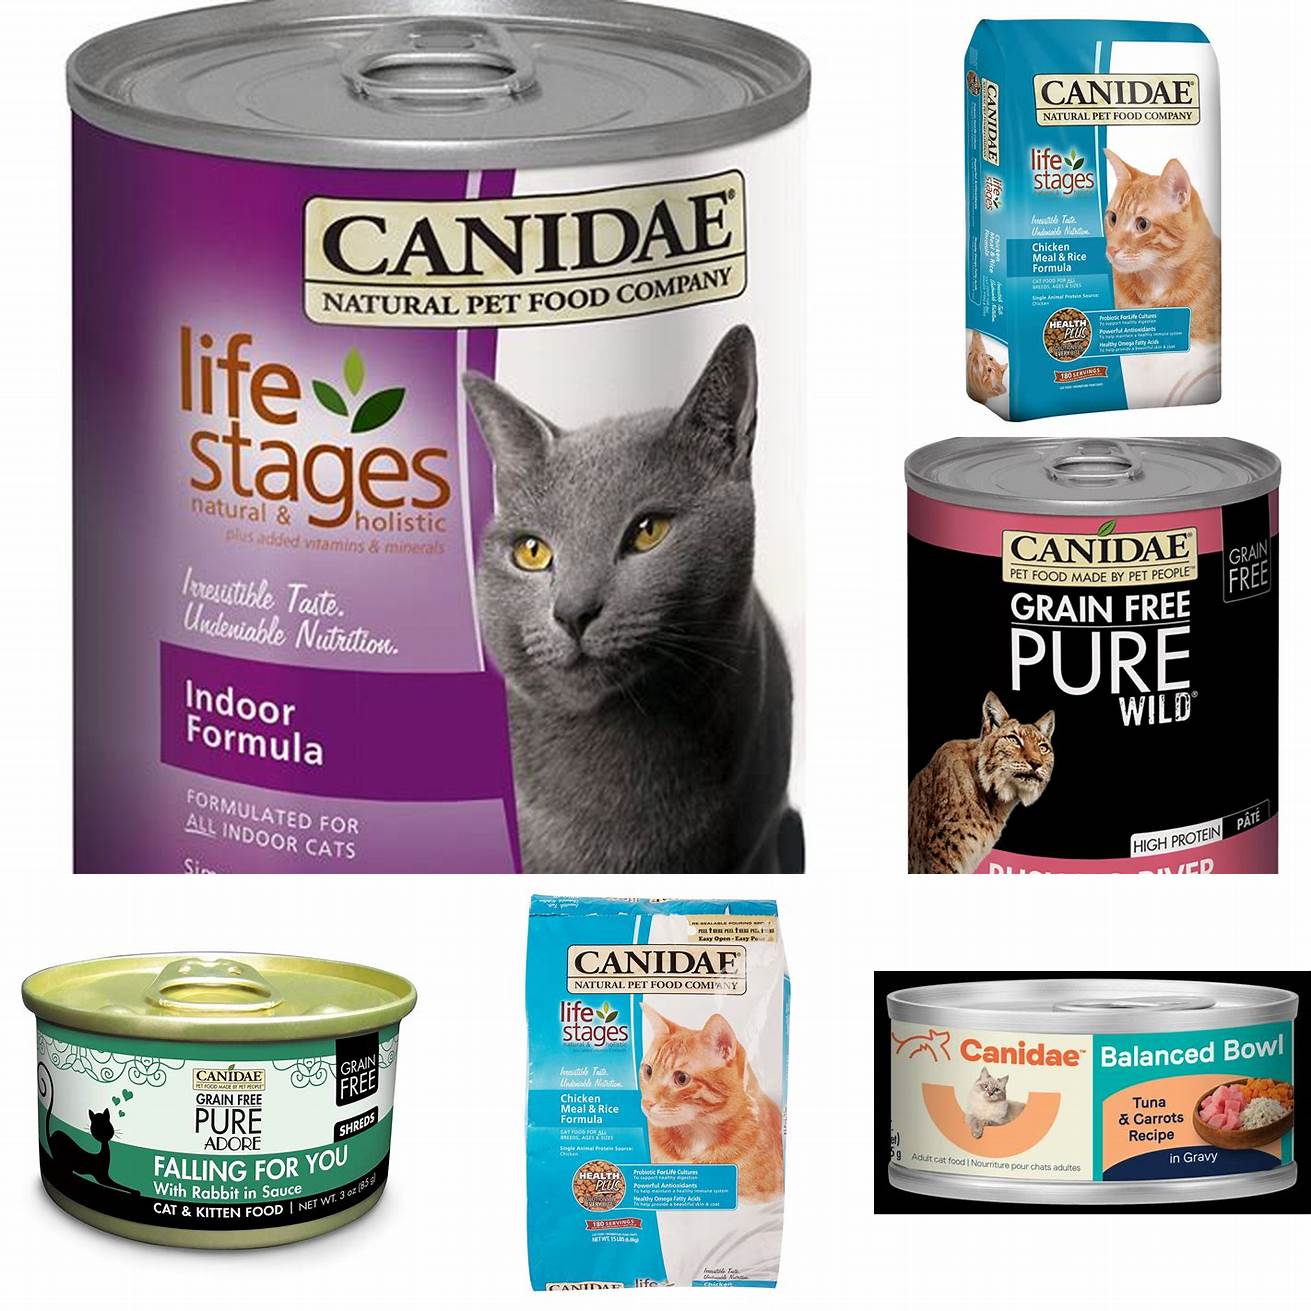 Canidae Wet Cat Food is made with high-quality ingredients that ensure your cat gets all the necessary nutrients